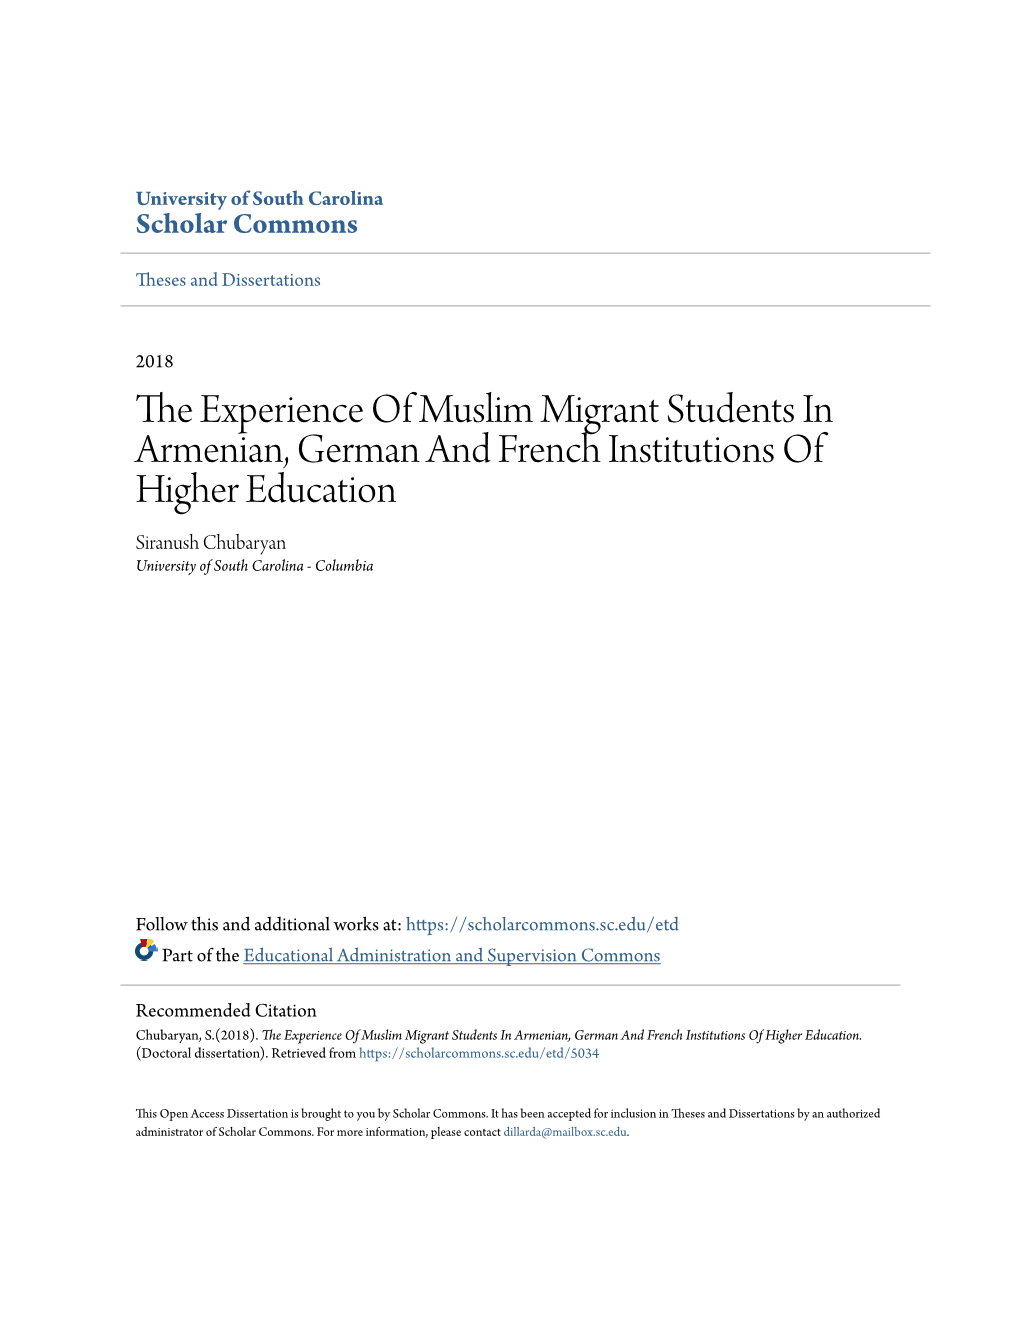 The Experience of Muslim Migrant Students in Armenian, German and French Institutions of Higher Education Siranush Chubaryan University of South Carolina - Columbia